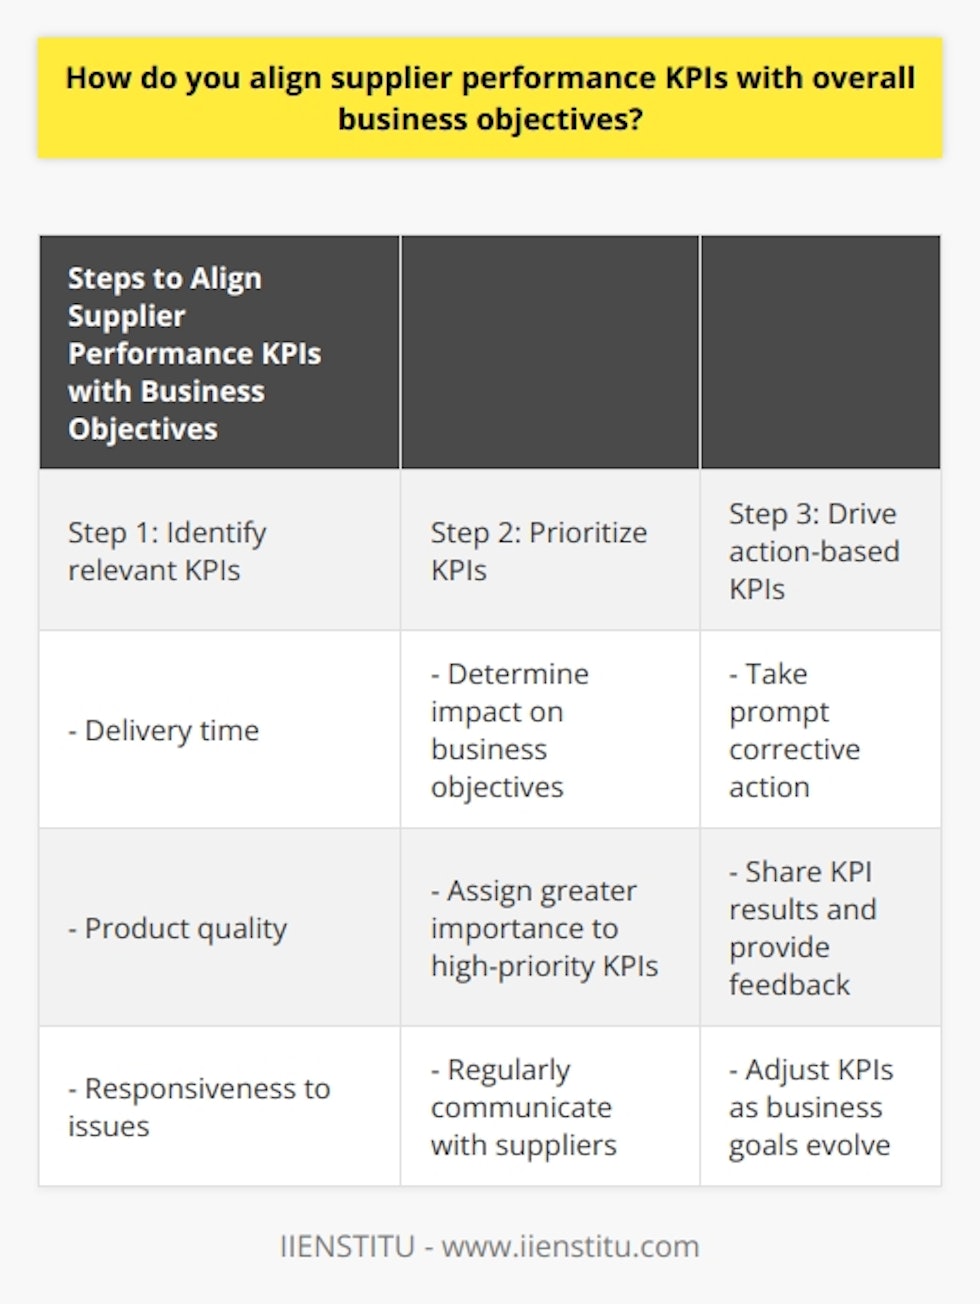 Aligning supplier performance Key Performance Indicators (KPIs) with overall business objectives is crucial for the success of any organization. By aligning these metrics, businesses can ensure that their suppliers are meeting the necessary standards and contributing to the achievement of strategic goals.The first step in aligning supplier performance KPIs with overall business objectives is to identify the relevant KPIs. These KPIs should directly relate to the specific performance areas that are critical to the success of the business. For example, KPIs might include delivery time, product quality, and responsiveness to issues. These KPIs should be measurable, specific, and realistic to ensure effective alignment.After establishing the appropriate KPIs, it is important to prioritize them based on their impact on the business objectives. Not all KPIs carry the same level of significance, so it is crucial to determine which ones are most closely tied to the strategic goals of the organization. These high-priority KPIs should be given greater importance and attention.The purpose of KPIs is to drive action and inform decision-making. They provide insights into whether a supplier's performance is supporting or hindering the business objectives. If KPIs indicate suboptimal performance, it is important to take prompt corrective action to ensure that the supplier is meeting the necessary standards.Effective communication is vital in aligning supplier performance KPIs with overall business objectives. It is important to regularly communicate with suppliers to ensure that they understand how their performance affects the business. Sharing KPI results and providing feedback allows suppliers to gauge their progress and make adjustments to their operations to better align with the organization's objectives.Regular review of KPIs is essential as business goals often evolve over time. As objectives shift, it is important to adjust the KPIs accordingly to keep supplier performance aligned with current business priorities. This ensures that the organization's performance measurement is always aligned with its strategic goals.In conclusion, aligning supplier performance KPIs with overall business objectives is an ongoing and dynamic process. It requires setting appropriate KPIs, prioritizing them based on their impact, driving action-based KPIs, maintaining open communication with suppliers, and conducting regular performance reviews. This alignment is vital for achieving strategic business objectives and creating mutually beneficial relationships with suppliers.